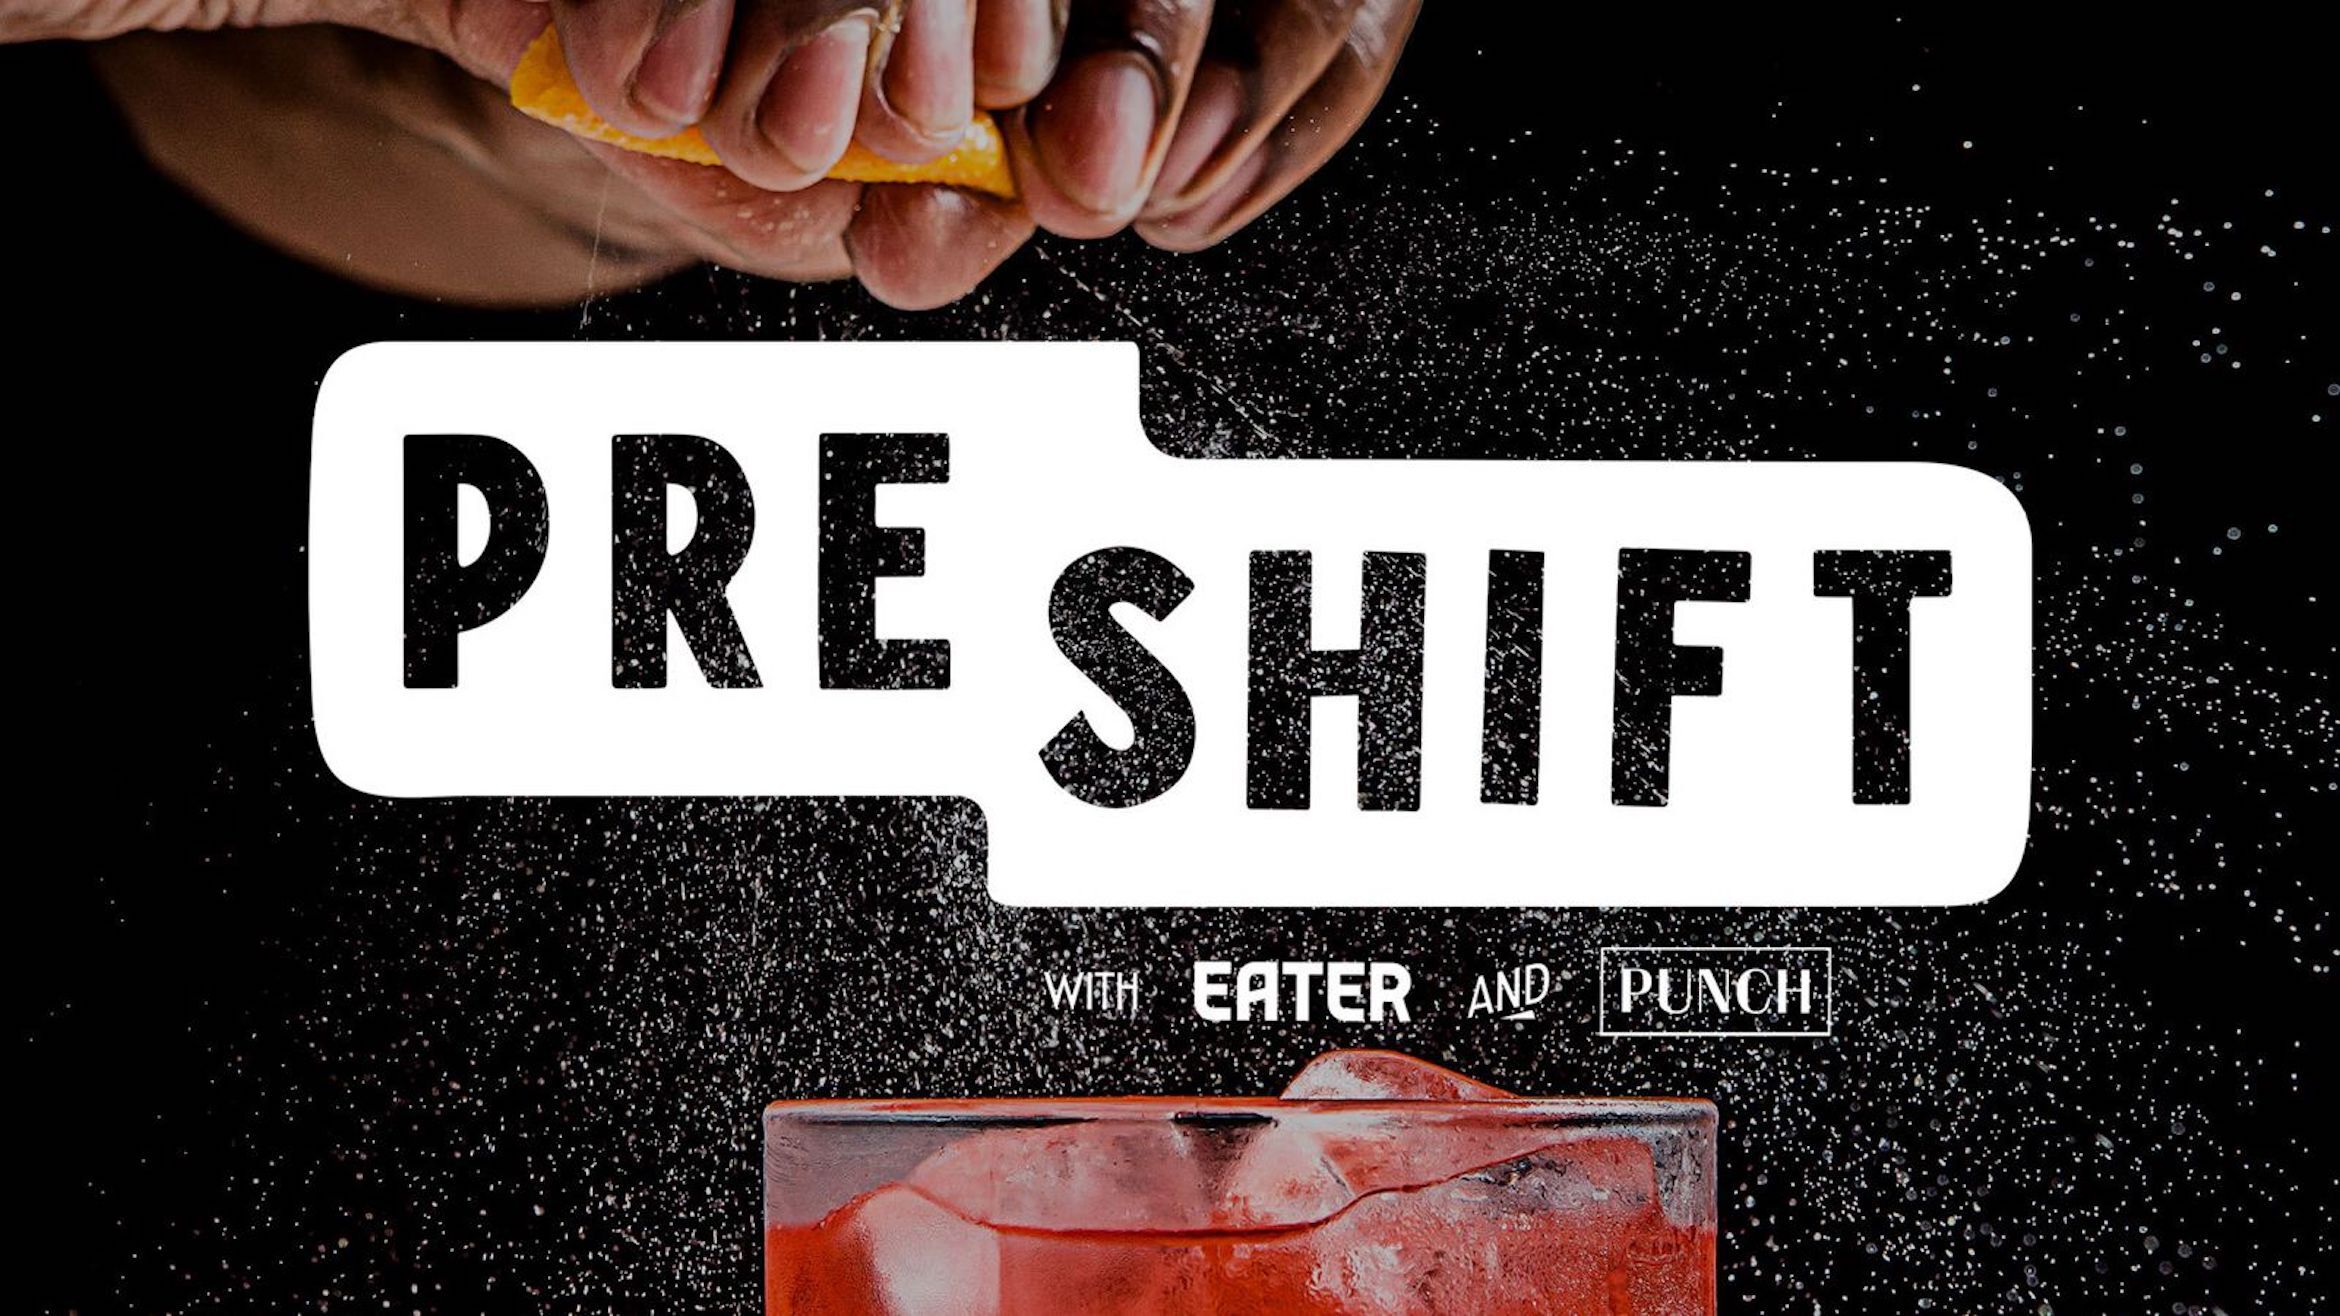 Sign Up for Pre Shift